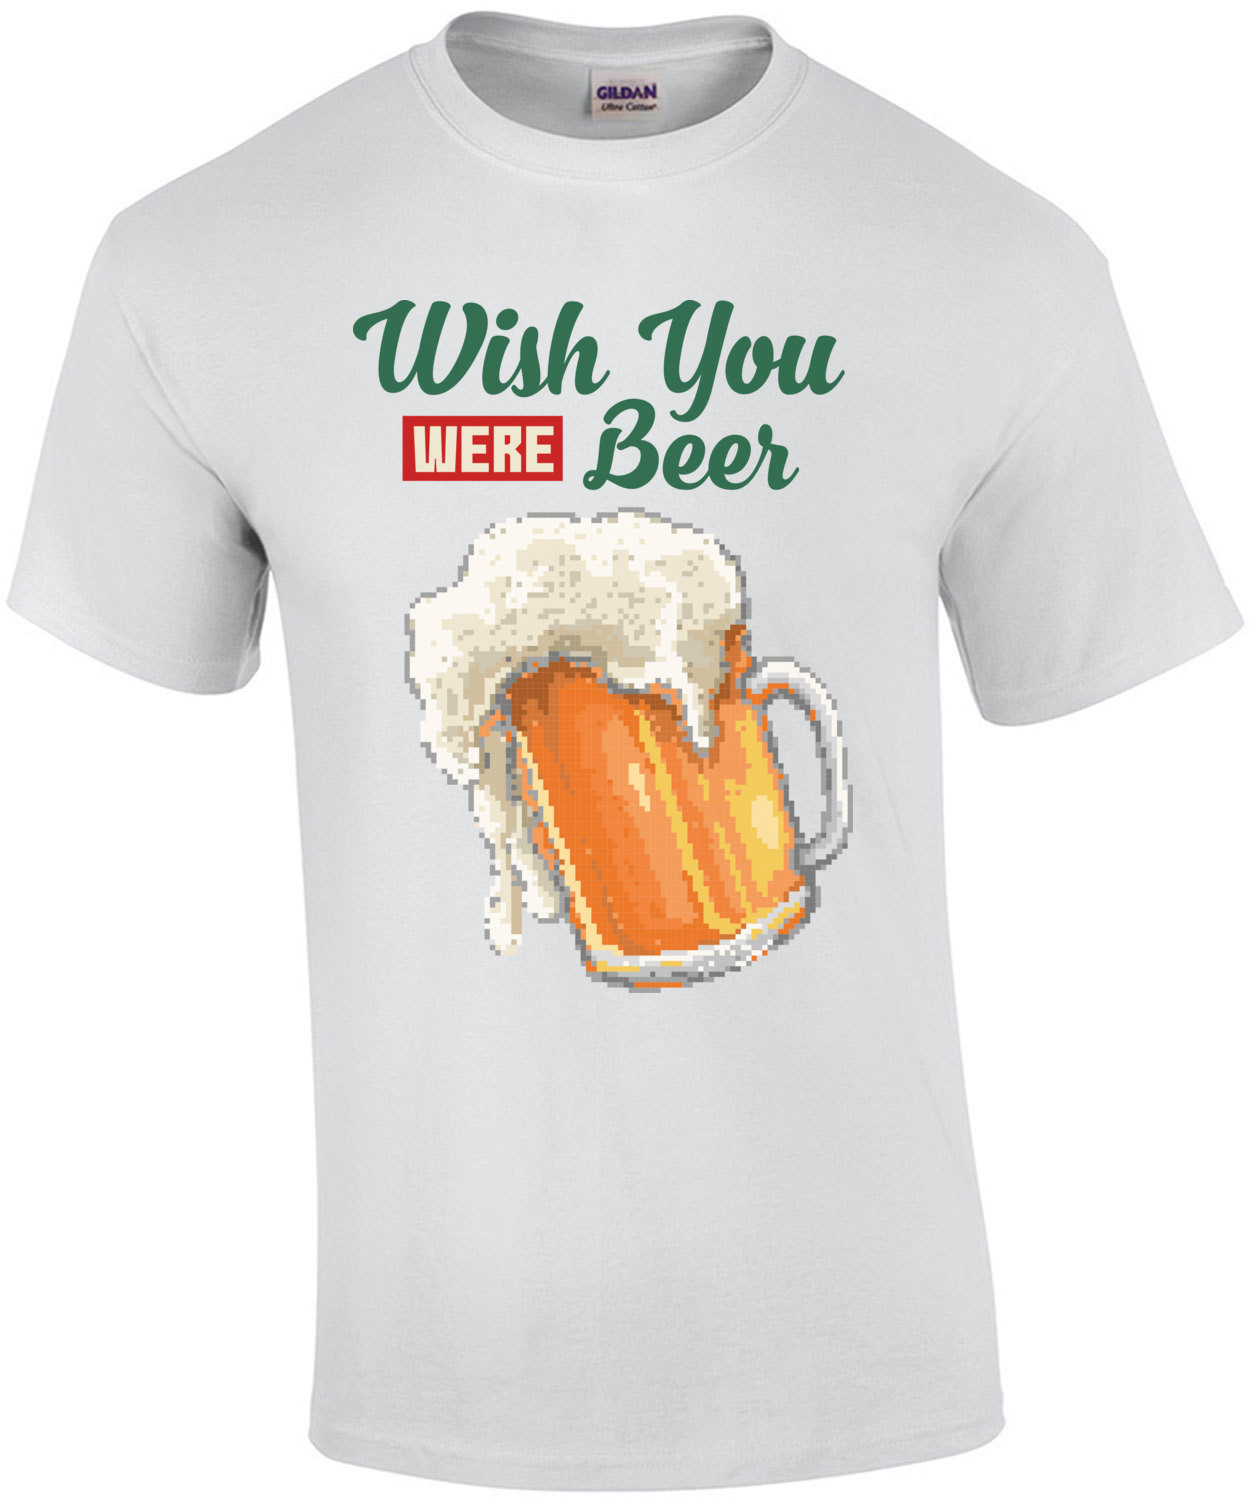 Wish You We're Beer Retro Drinking T-Shirt